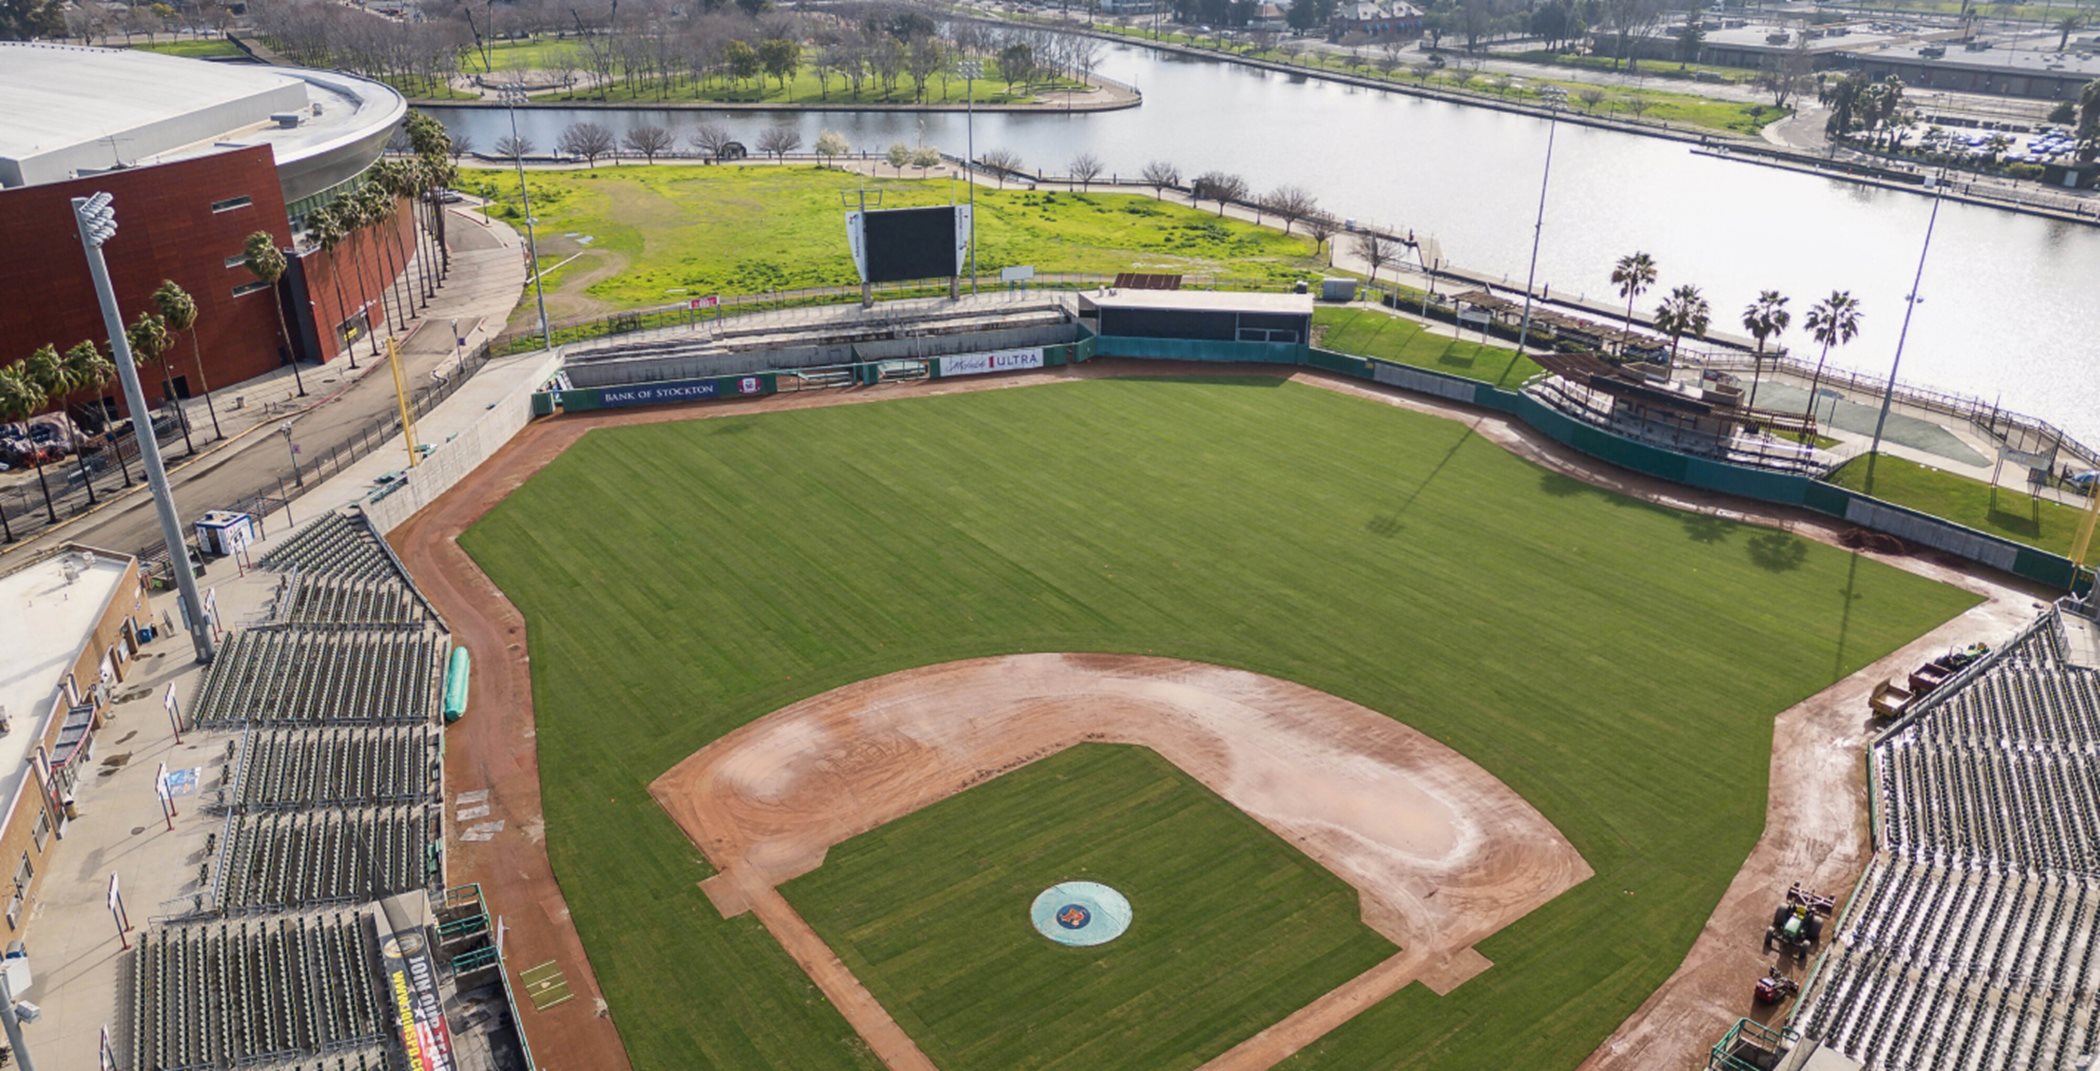 Aerial view of a baseball field